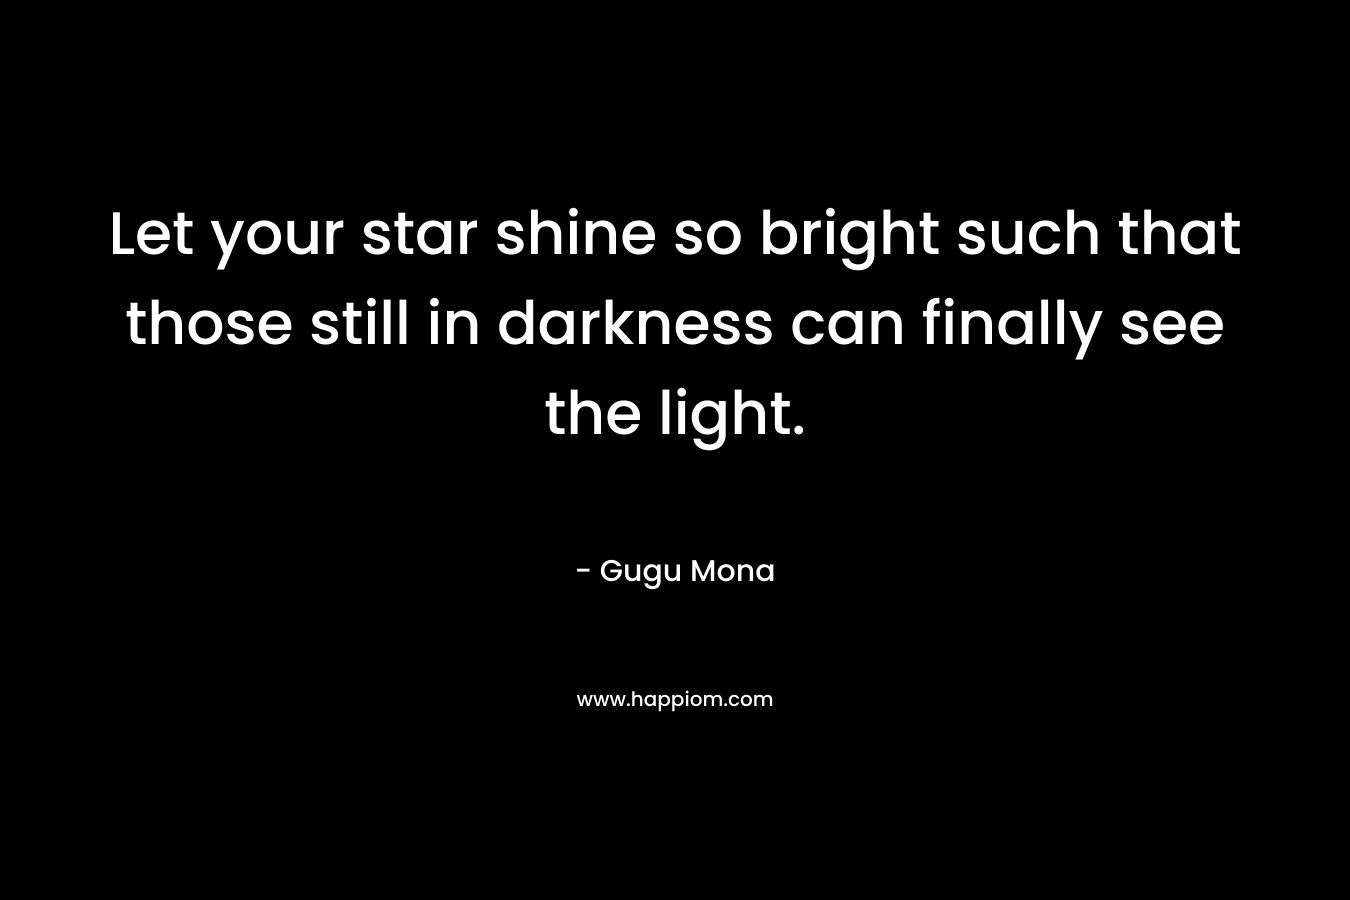 Let your star shine so bright such that those still in darkness can finally see the light.